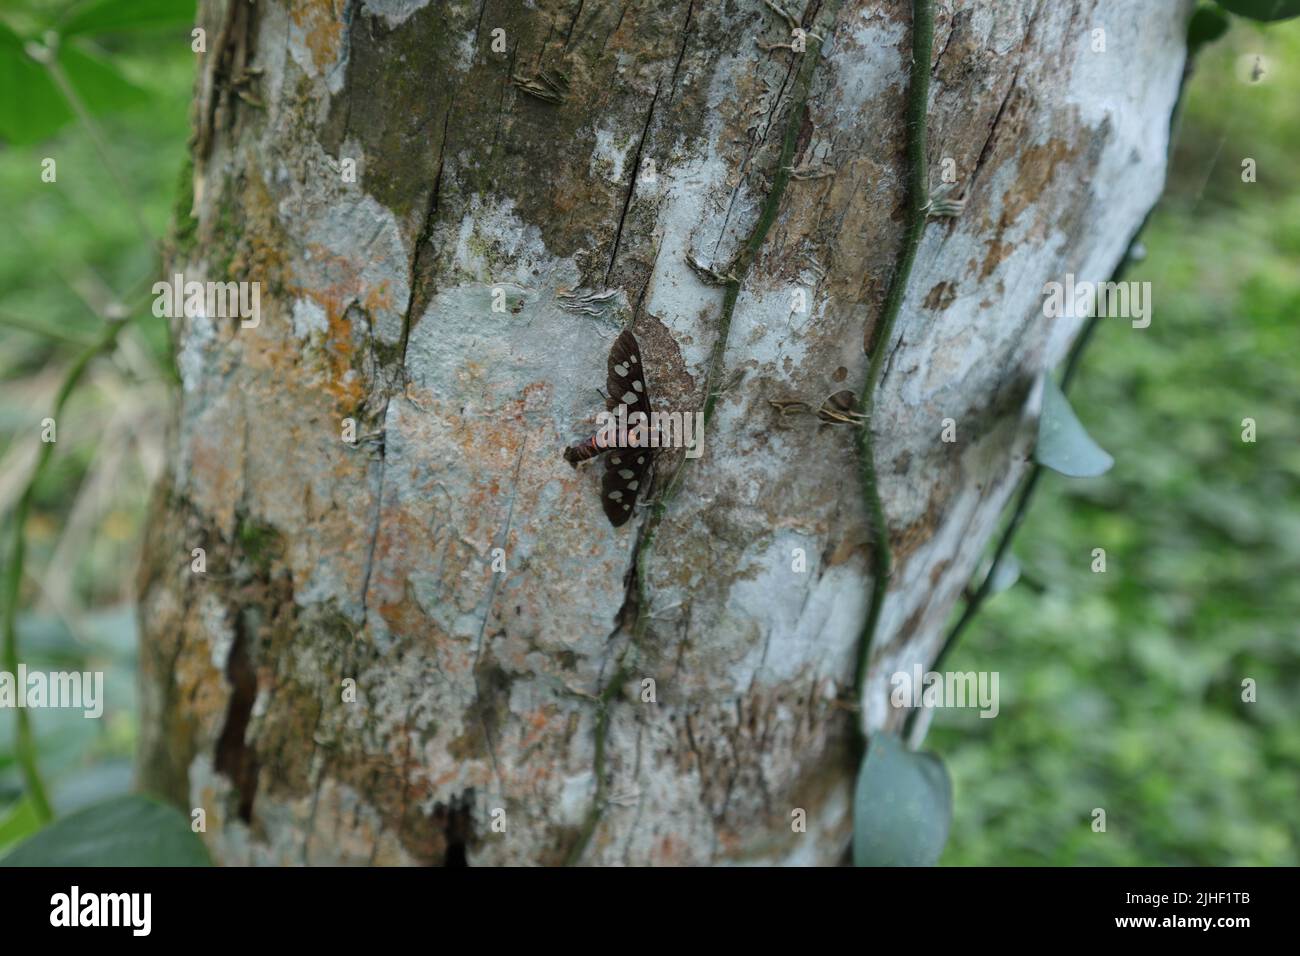 An Amata Passalis moth (sandalwood defoliator) perched on the surface of the coconut trunk covered with lichen Stock Photo